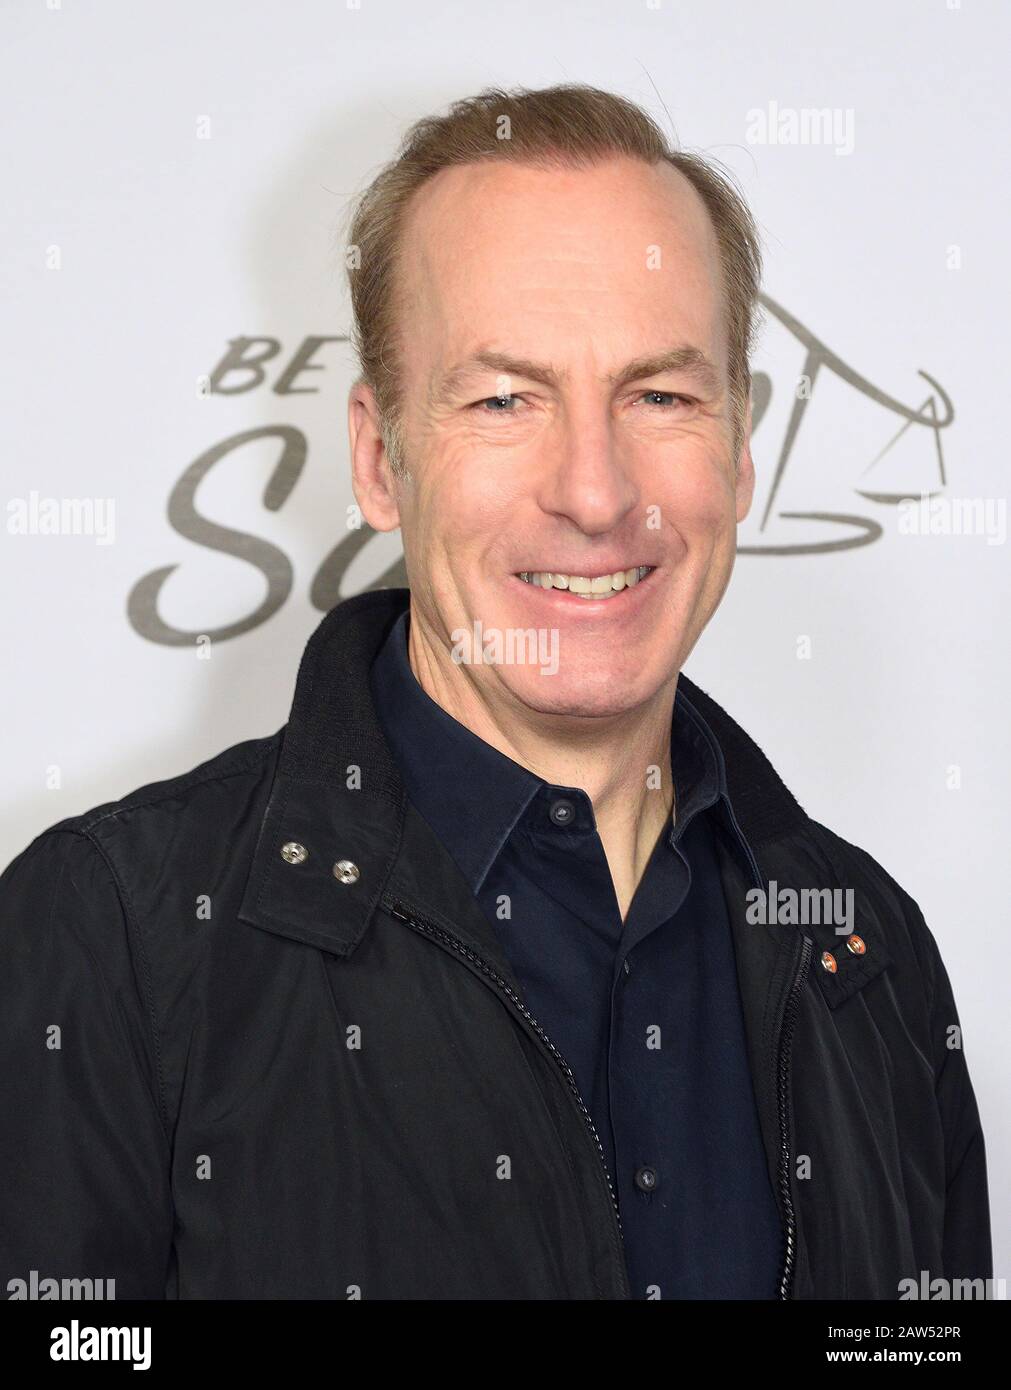 HOLLYWOOD, CALIFORNIA - FEBRUARY 05: Bob Odenkirk attends the premiere of AMC's 'Better Call Saul' Season 5 at ArcLight Cinemas on February 05, 2020 in Hollywood, California. Photo: Annie Lesser/imageSPACE/MediaPunch Stock Photo